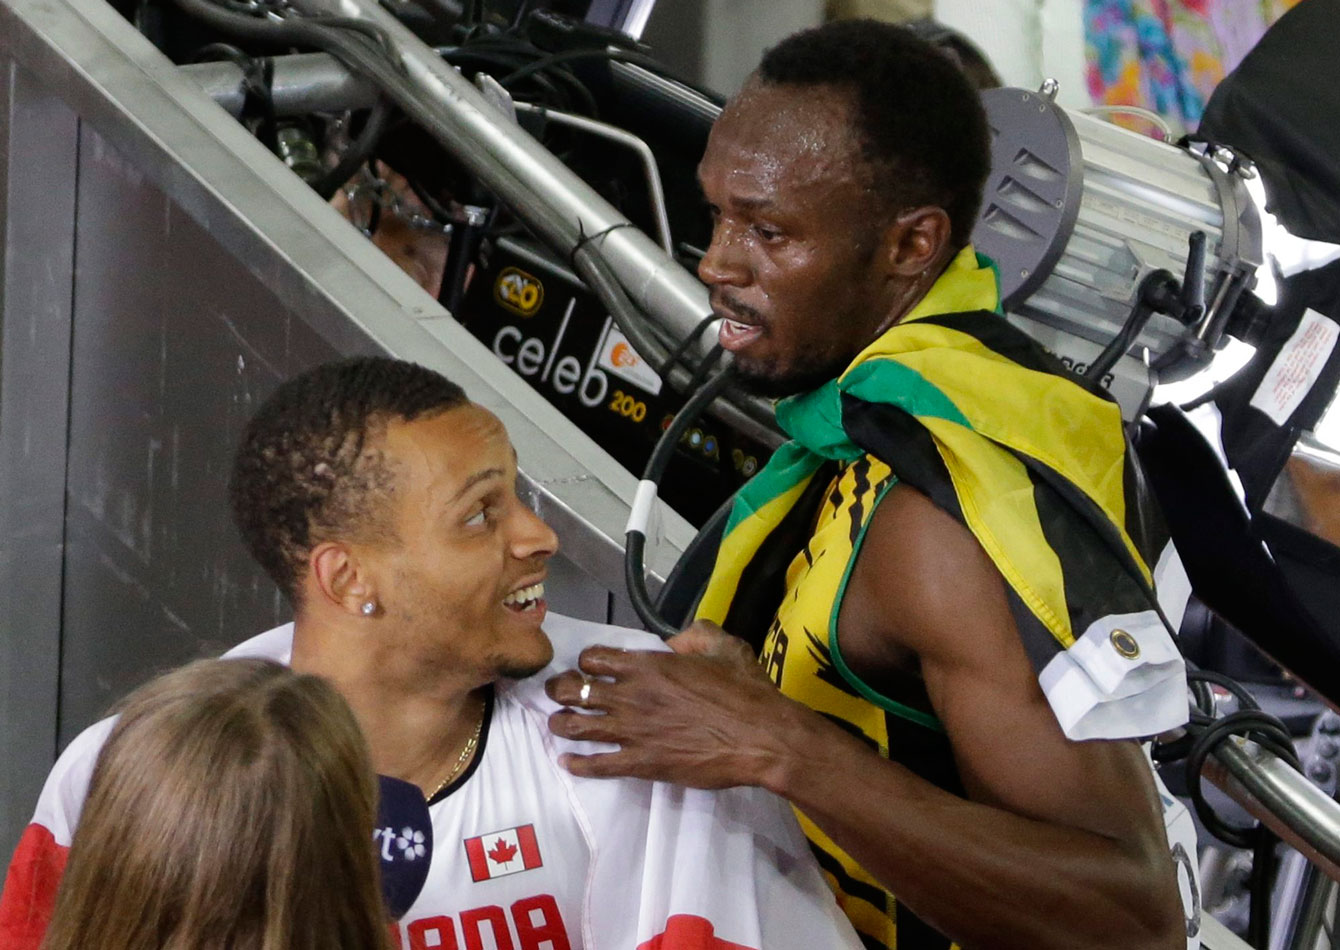 Usain Bolt and Andre De Grasse share a moment after both men won medals in the 100m at the 2015 IAAF World Championships on August 23, 2015 in Beijing, China. 